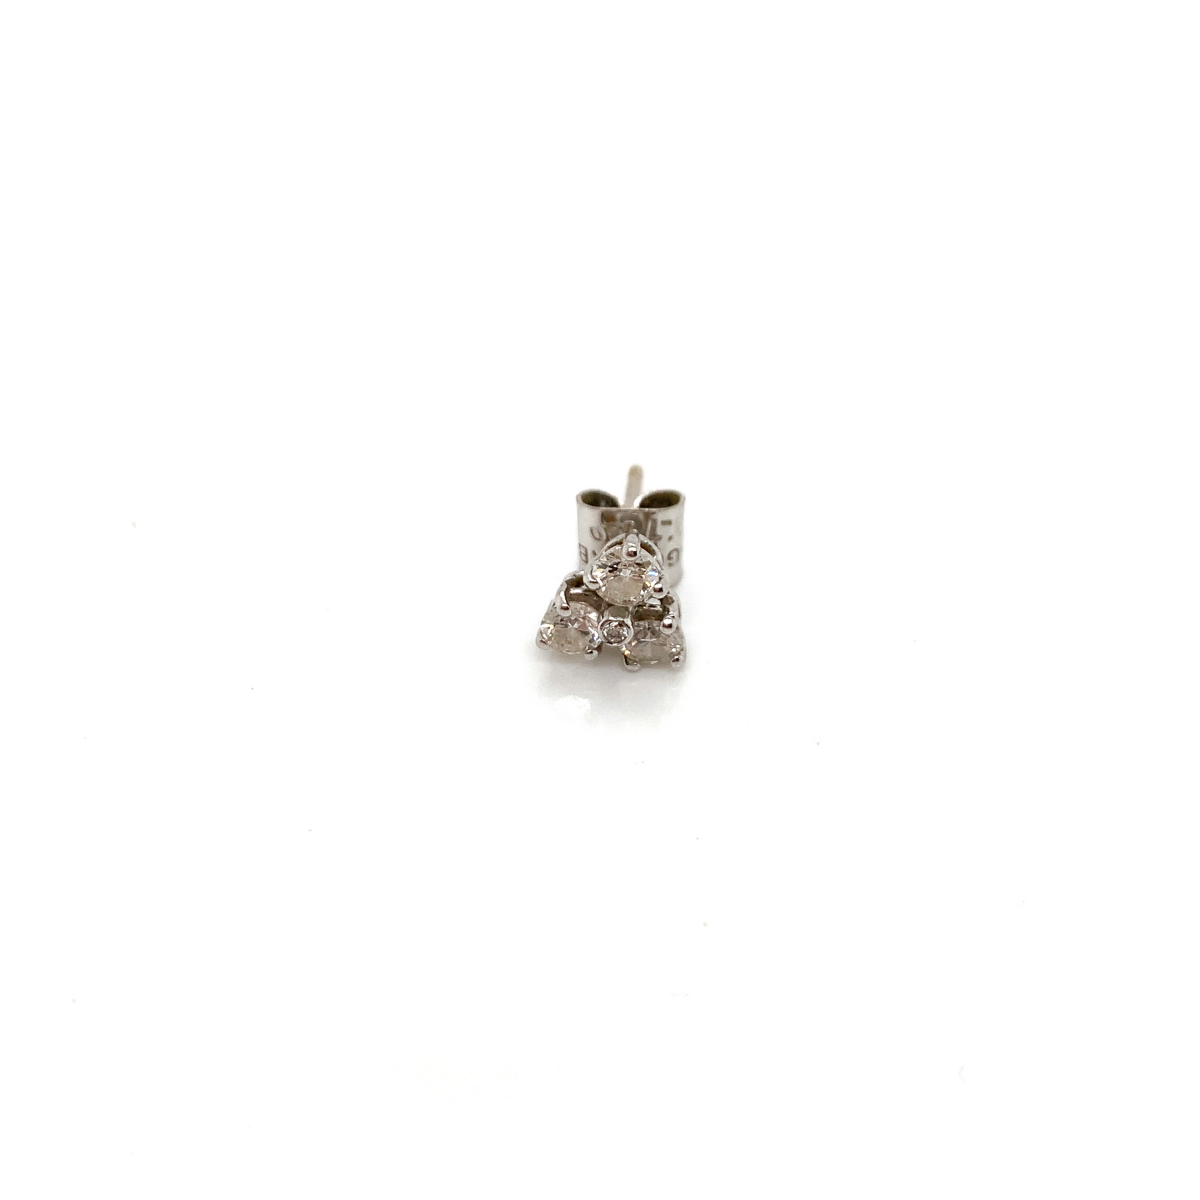 A FOUR STONE DIAMOND EARRING. THE SINGLE EARRING WITH NO HALLMARKS, ASSESSED AS 18ct WHITE GOLD. THE - Image 2 of 4